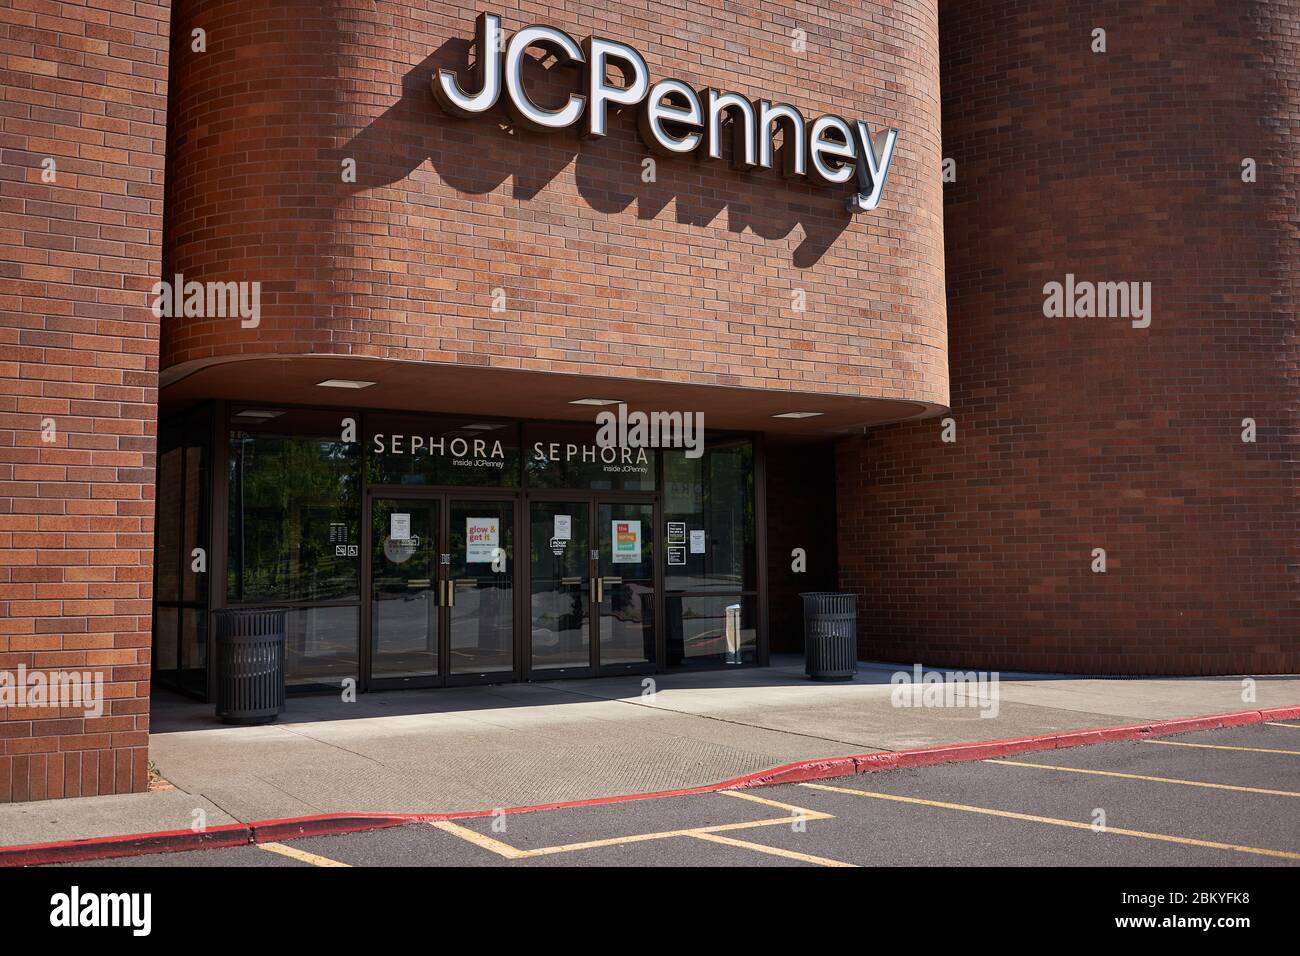 https://c8.alamy.com/comp/2BKYFK8/the-sephora-sign-is-seen-at-the-entrance-to-a-closed-jcpenney-store-jcpenney-filed-a-restraining-order-as-sephora-wanted-to-pull-out-of-the-stores-2BKYFK8.jpg